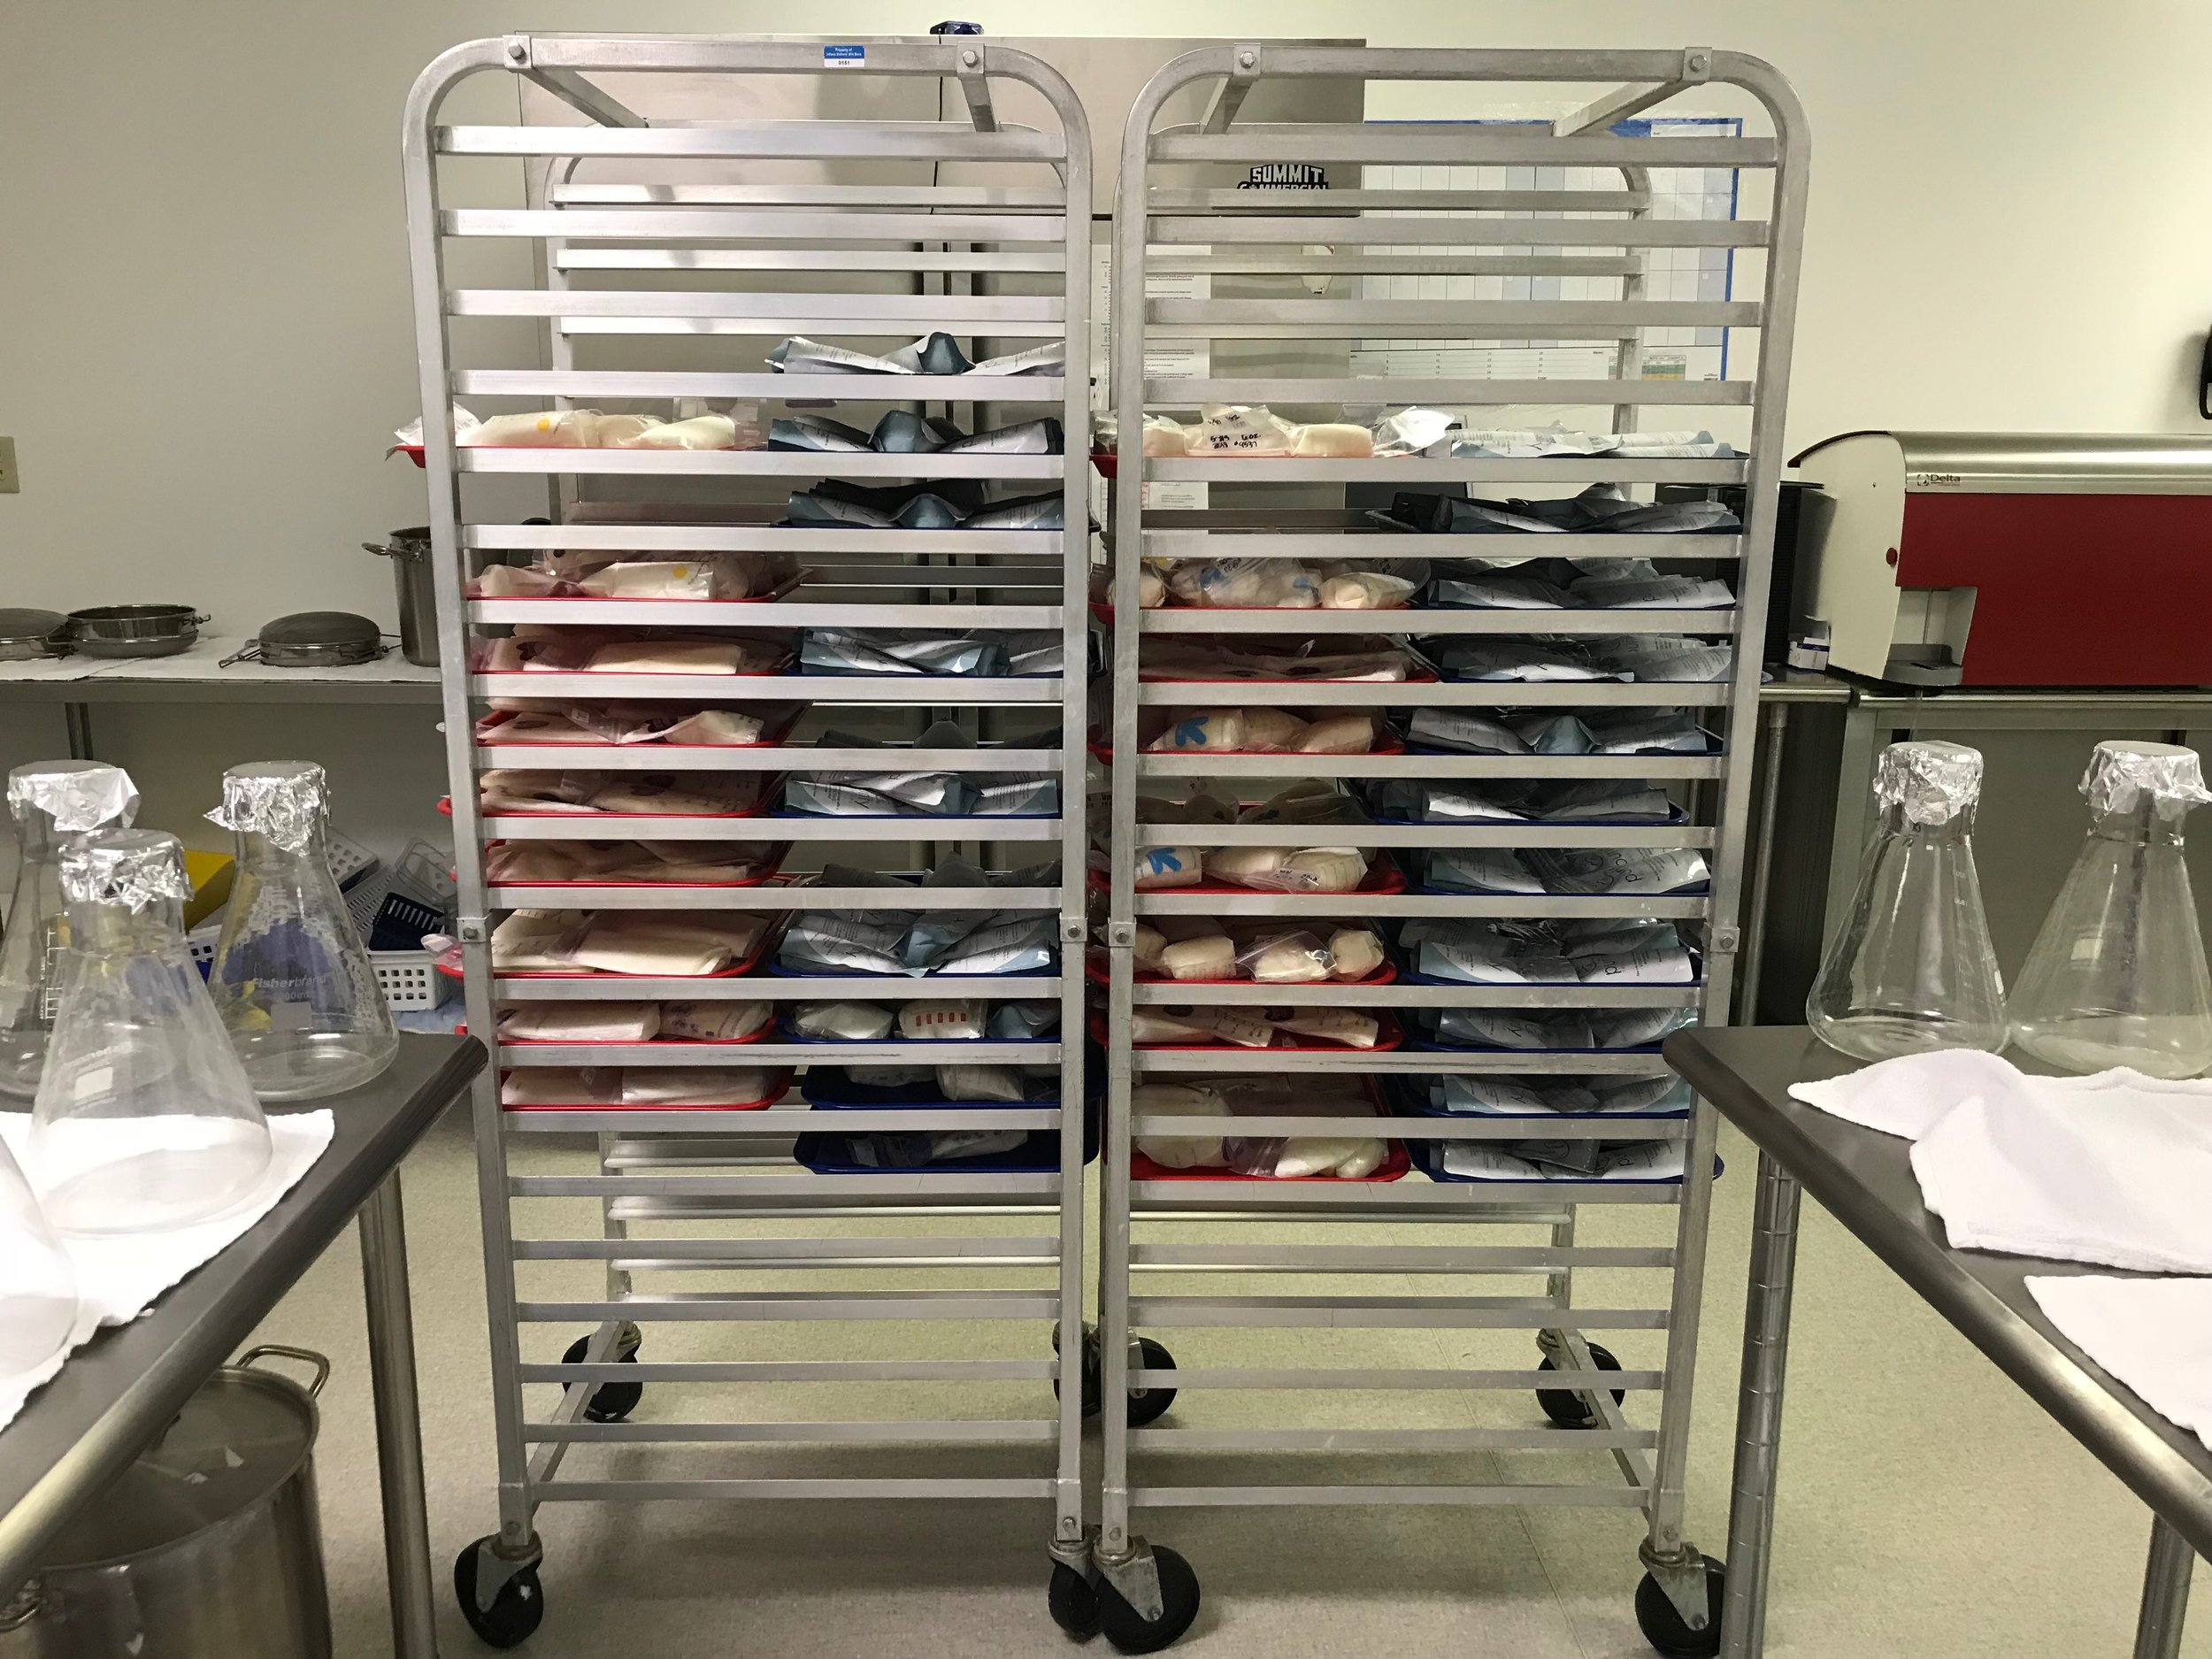 Trays of frozen donor milk are thawed in a controlled environment before flasking and analyzing.